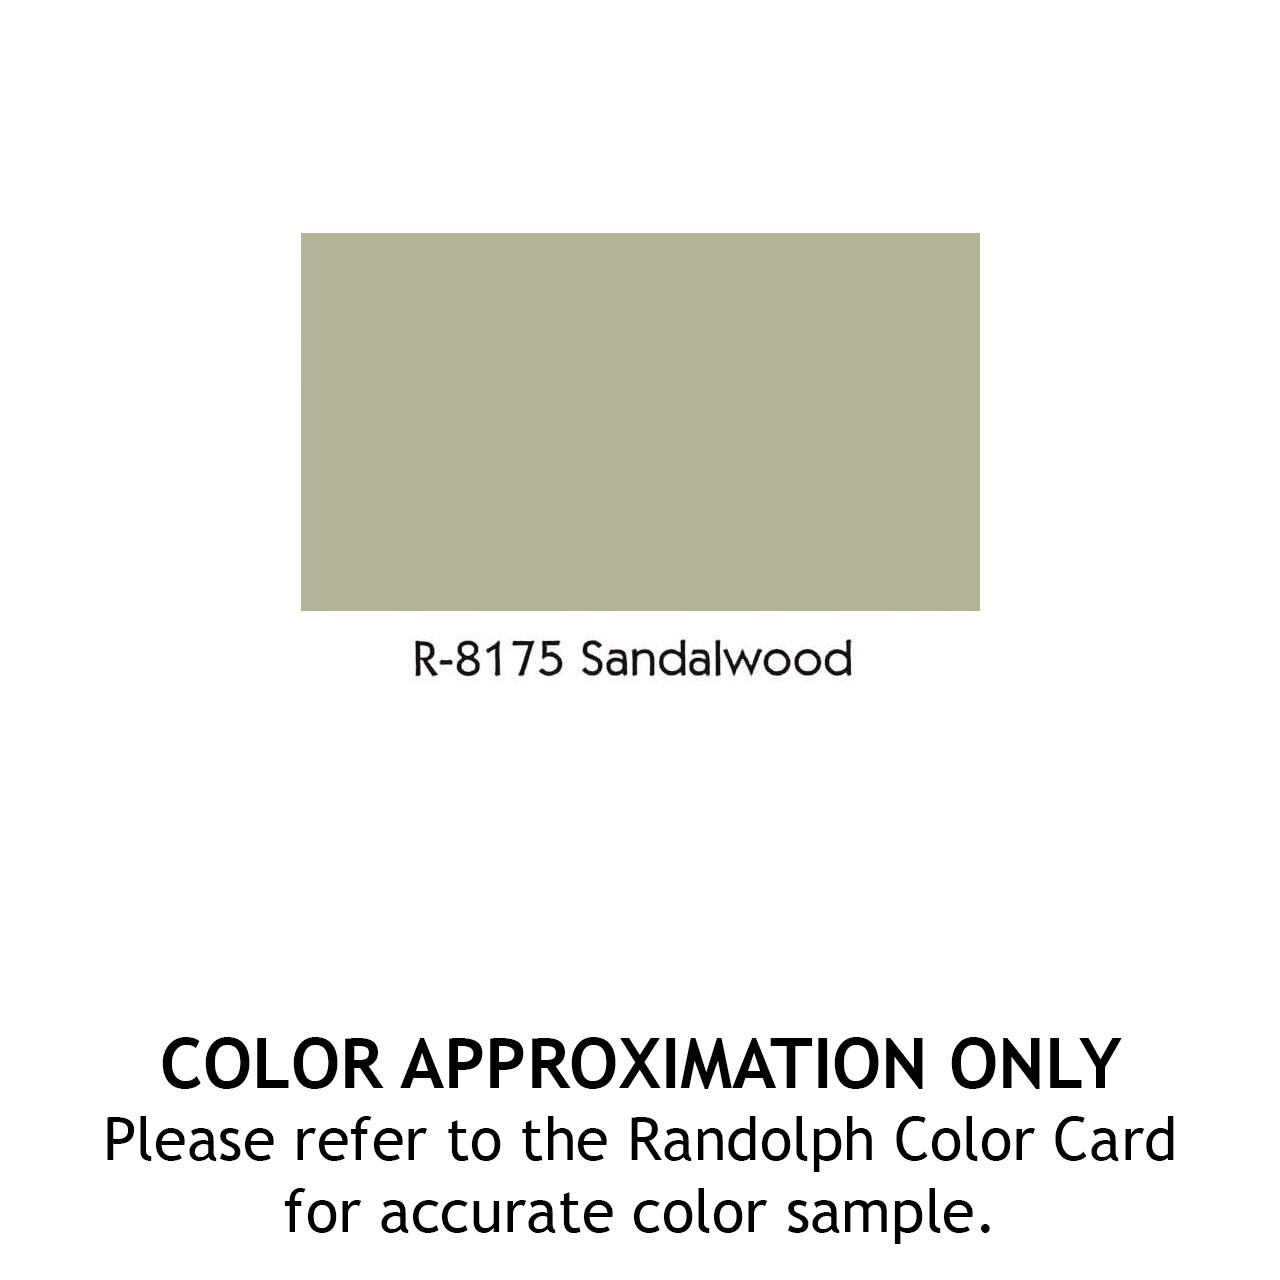 RANDOLPH COLORED BUTYRATE DOPE - SANDALWOOD BROWN